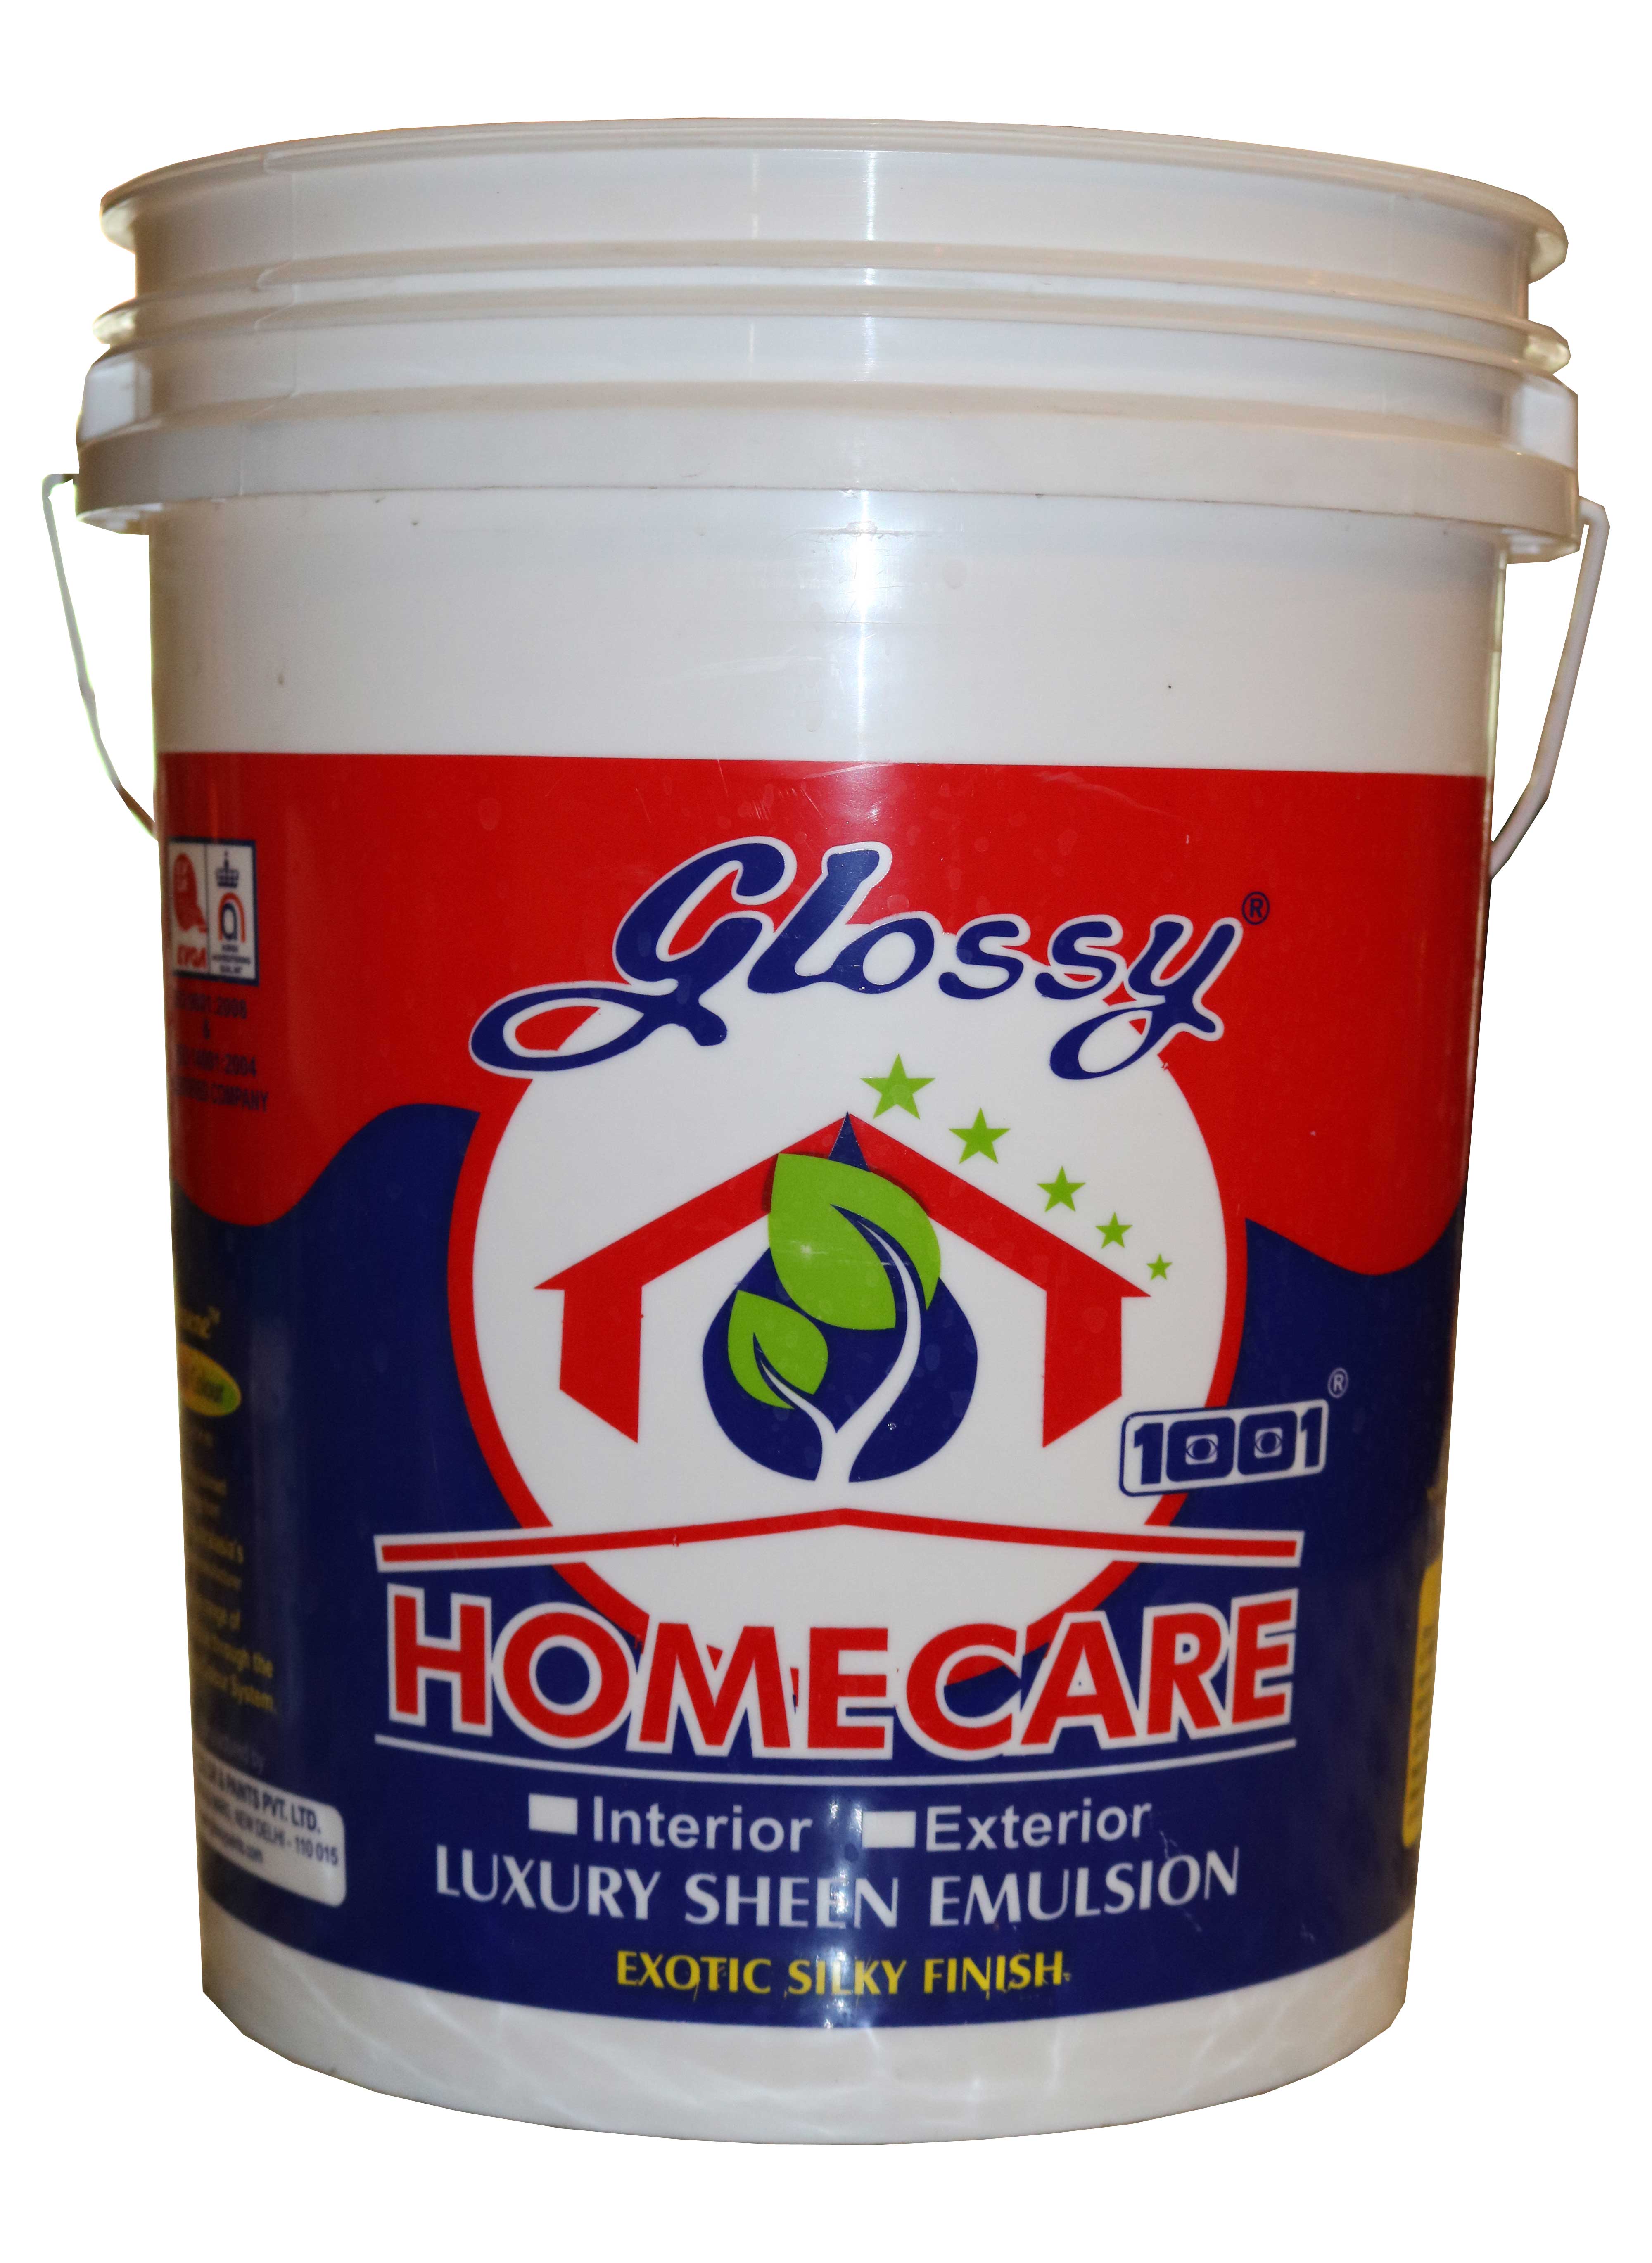 Glossy Home Care luxury Sheen Emulsion